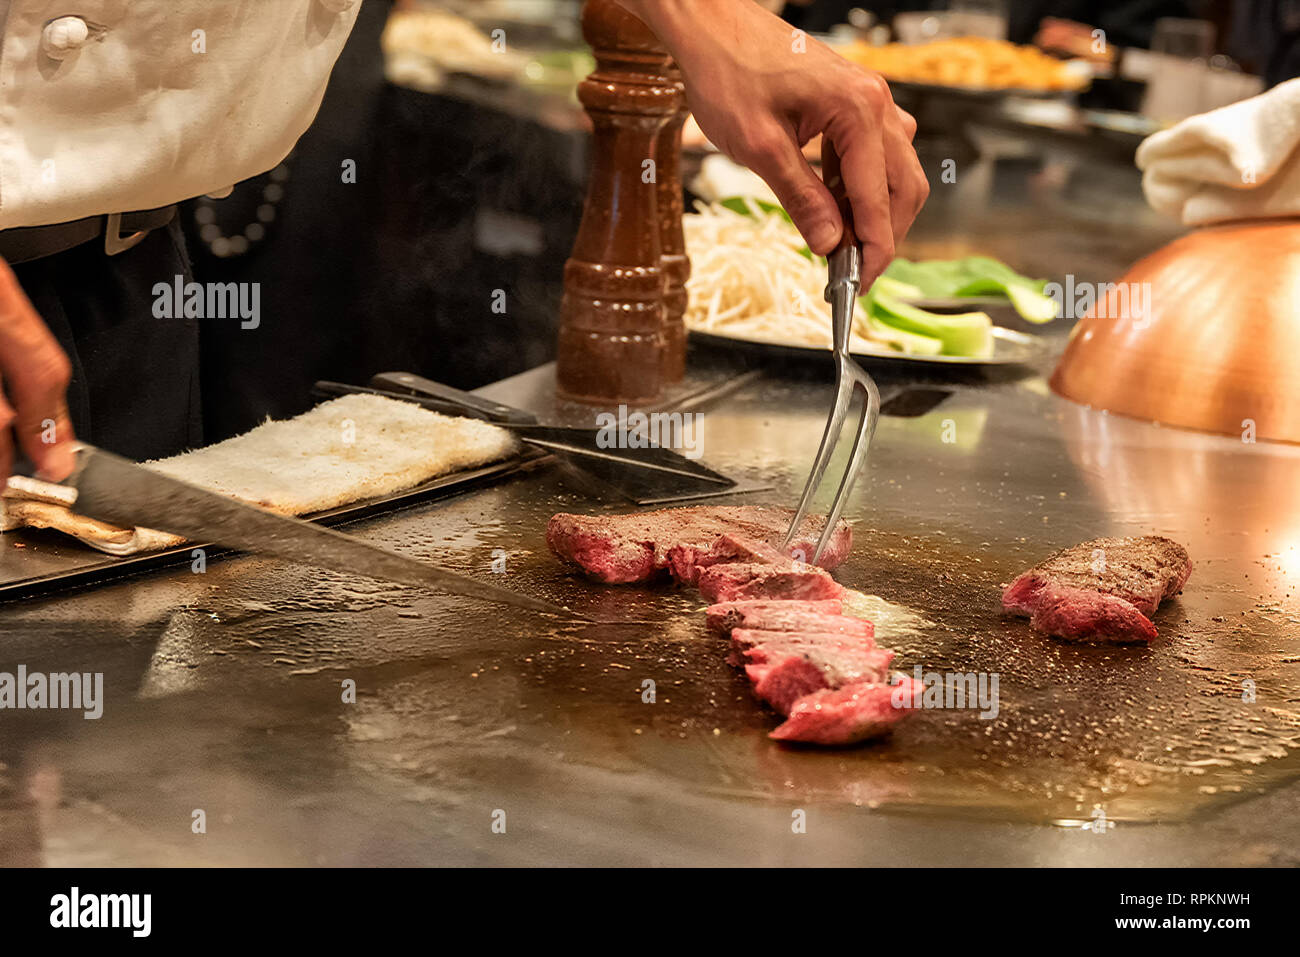 Chef at teppenyaki restaurant in Tokyo, Japan slicing Kobe beef on cooking surface Stock Photo